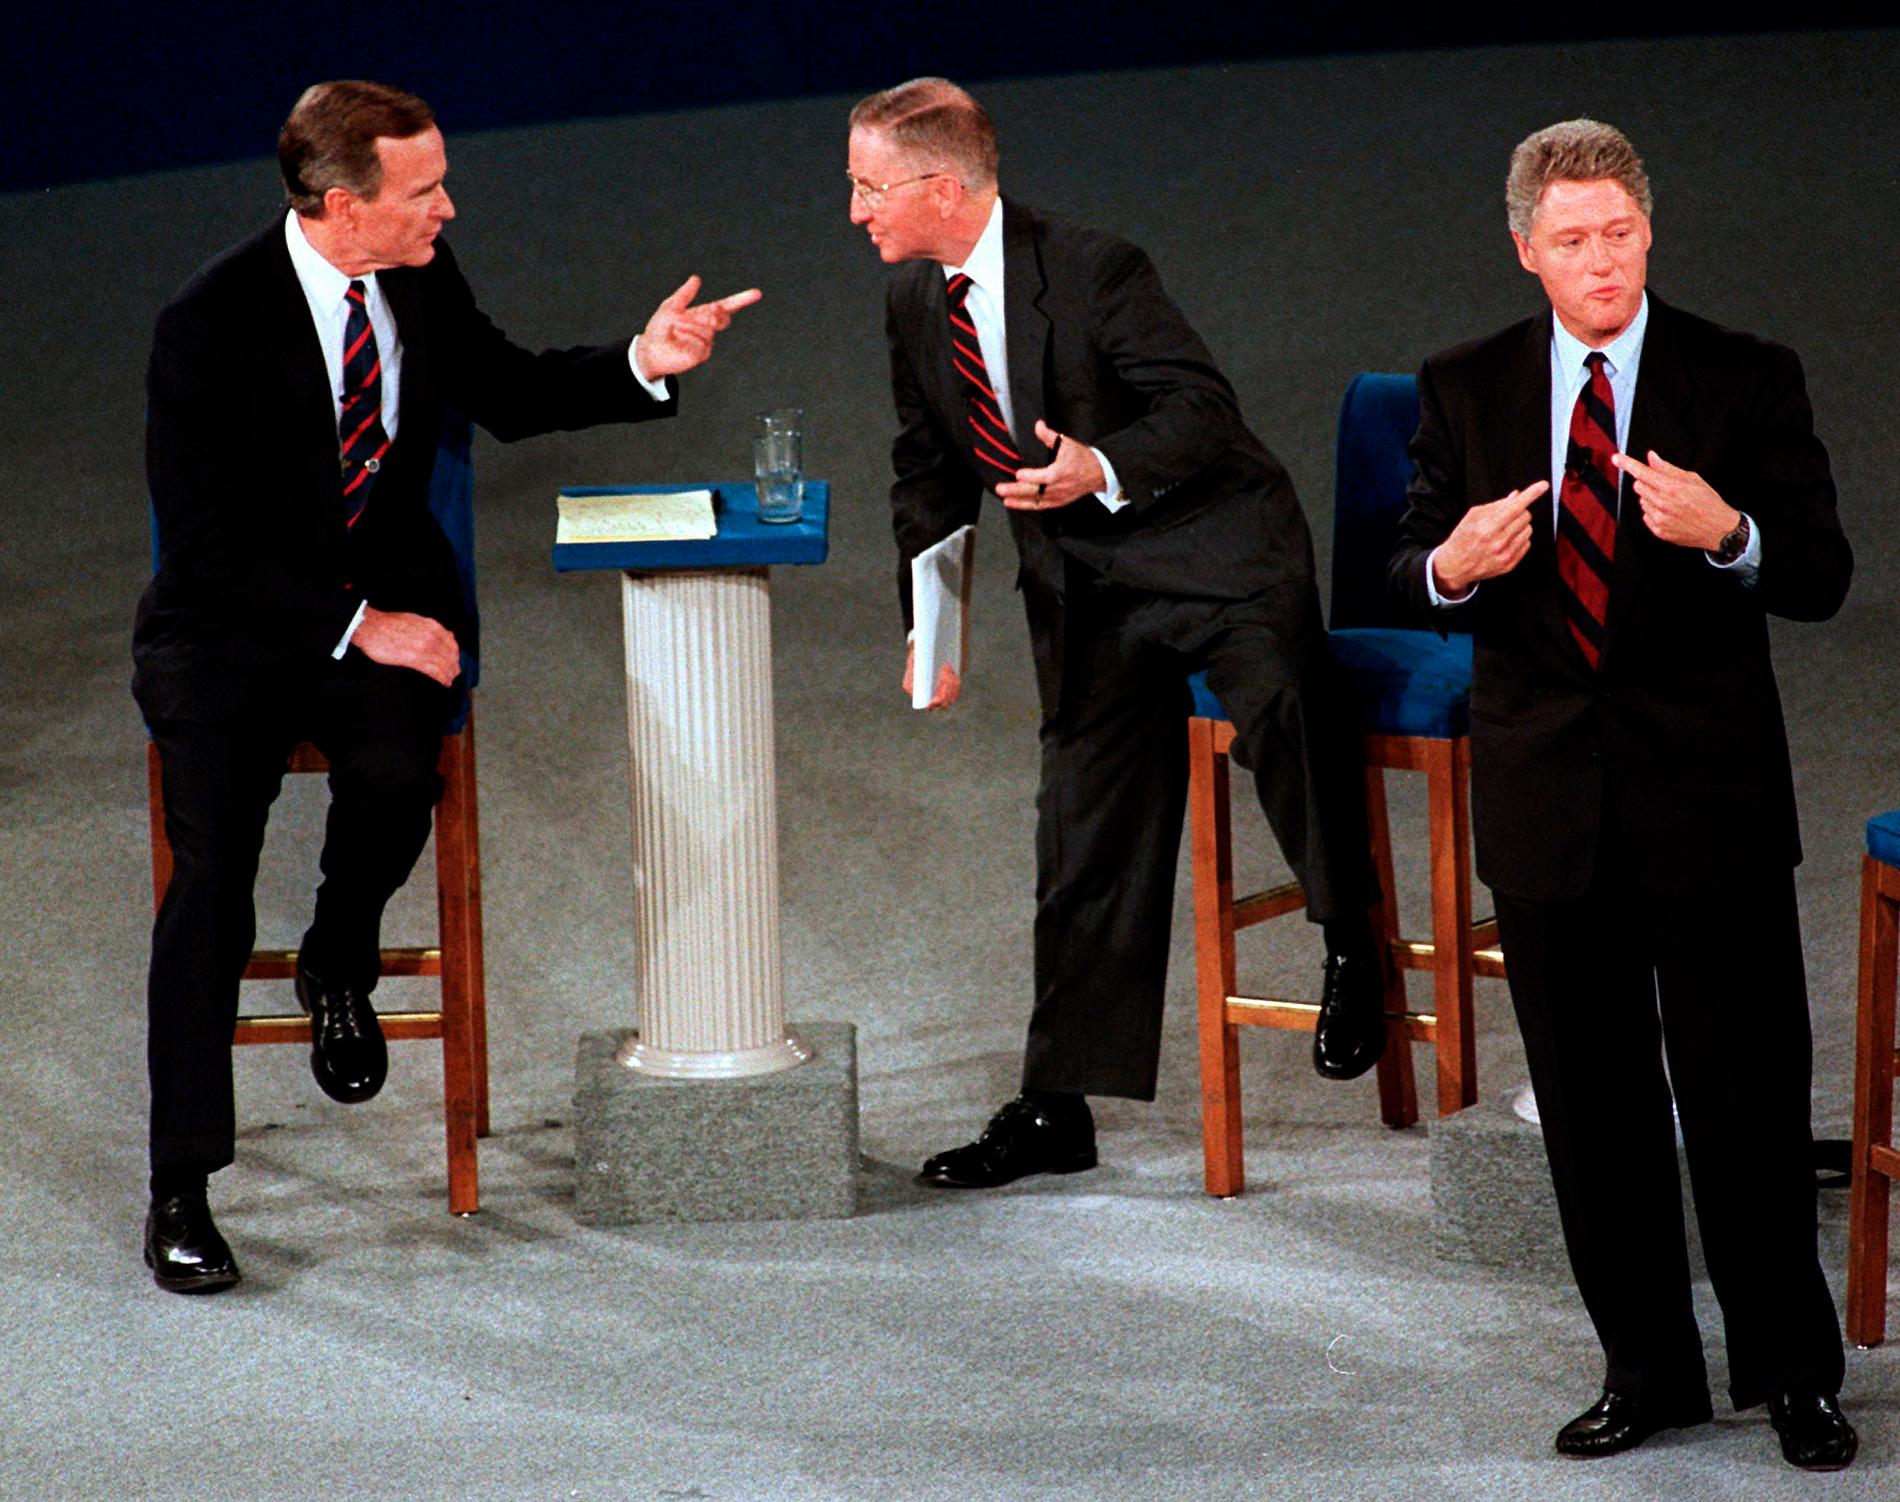 n this Oct. 15, 1992, file photo, President George H.W. Bush, left, talks with independent candidate Ross Perot as Democratic candidate Bill Clinton stands aside at the end of their second presidential debate in Richmond, Va.